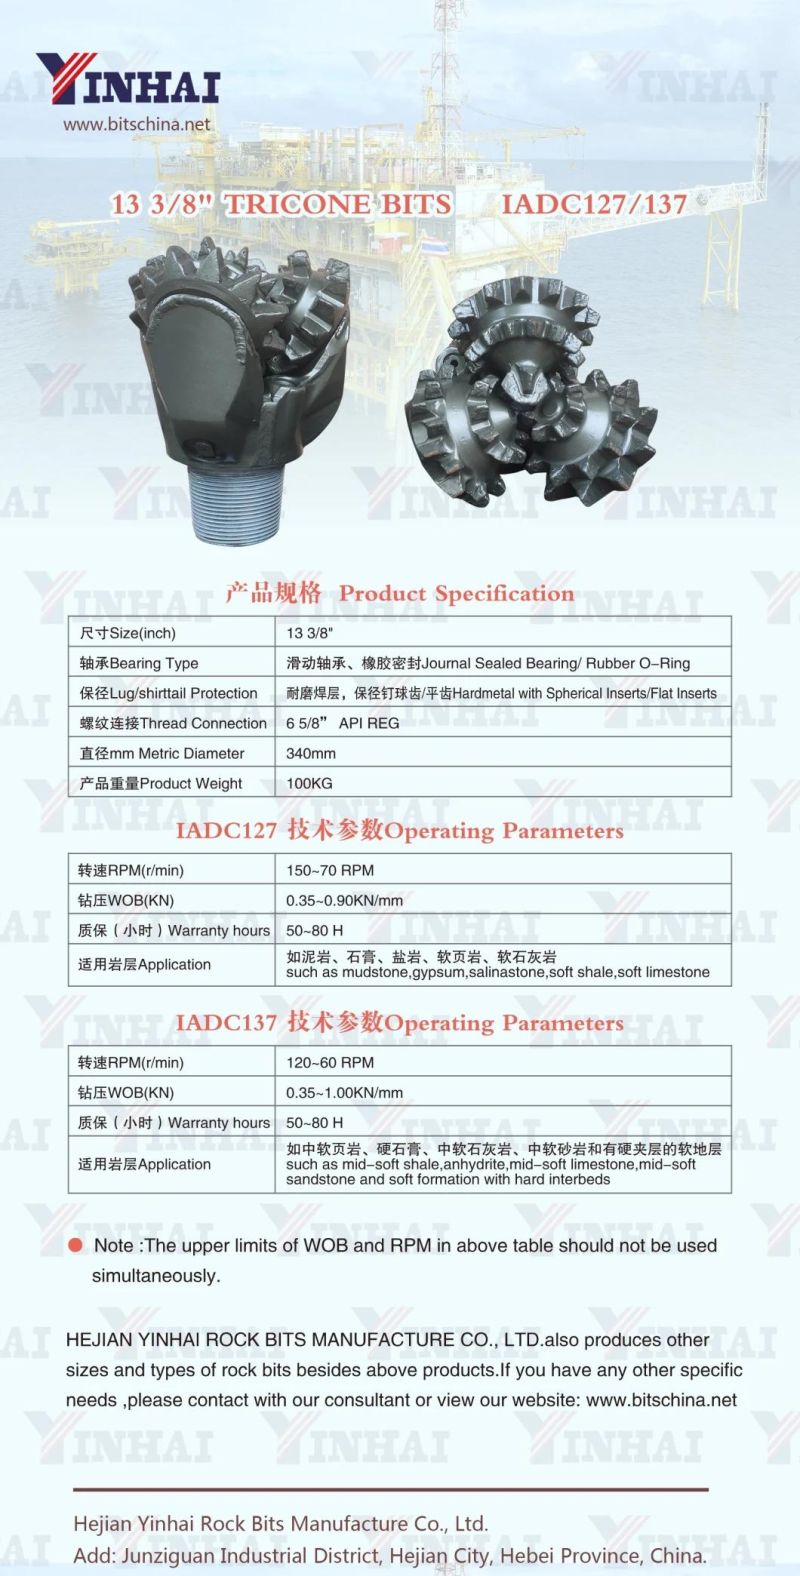 13 3/8" IADC127/137 Steel Milled Tooth Bit for Hard Formation